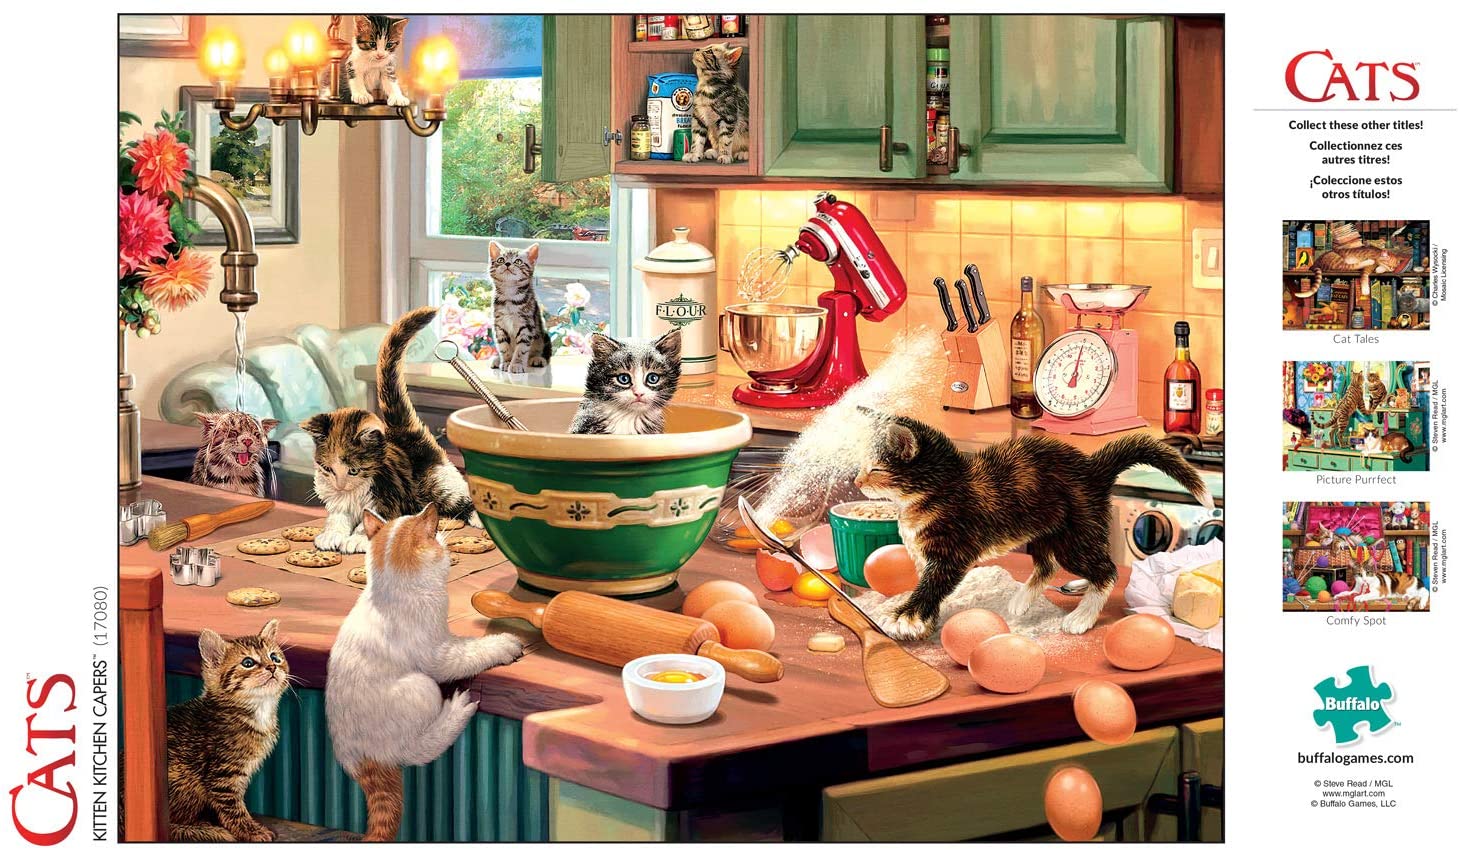 750-Piece Buffalo Games Kitten Kitchen Capers Jigsaw Puzzle $6.35 + Free Shipping w/ Prime or $25+